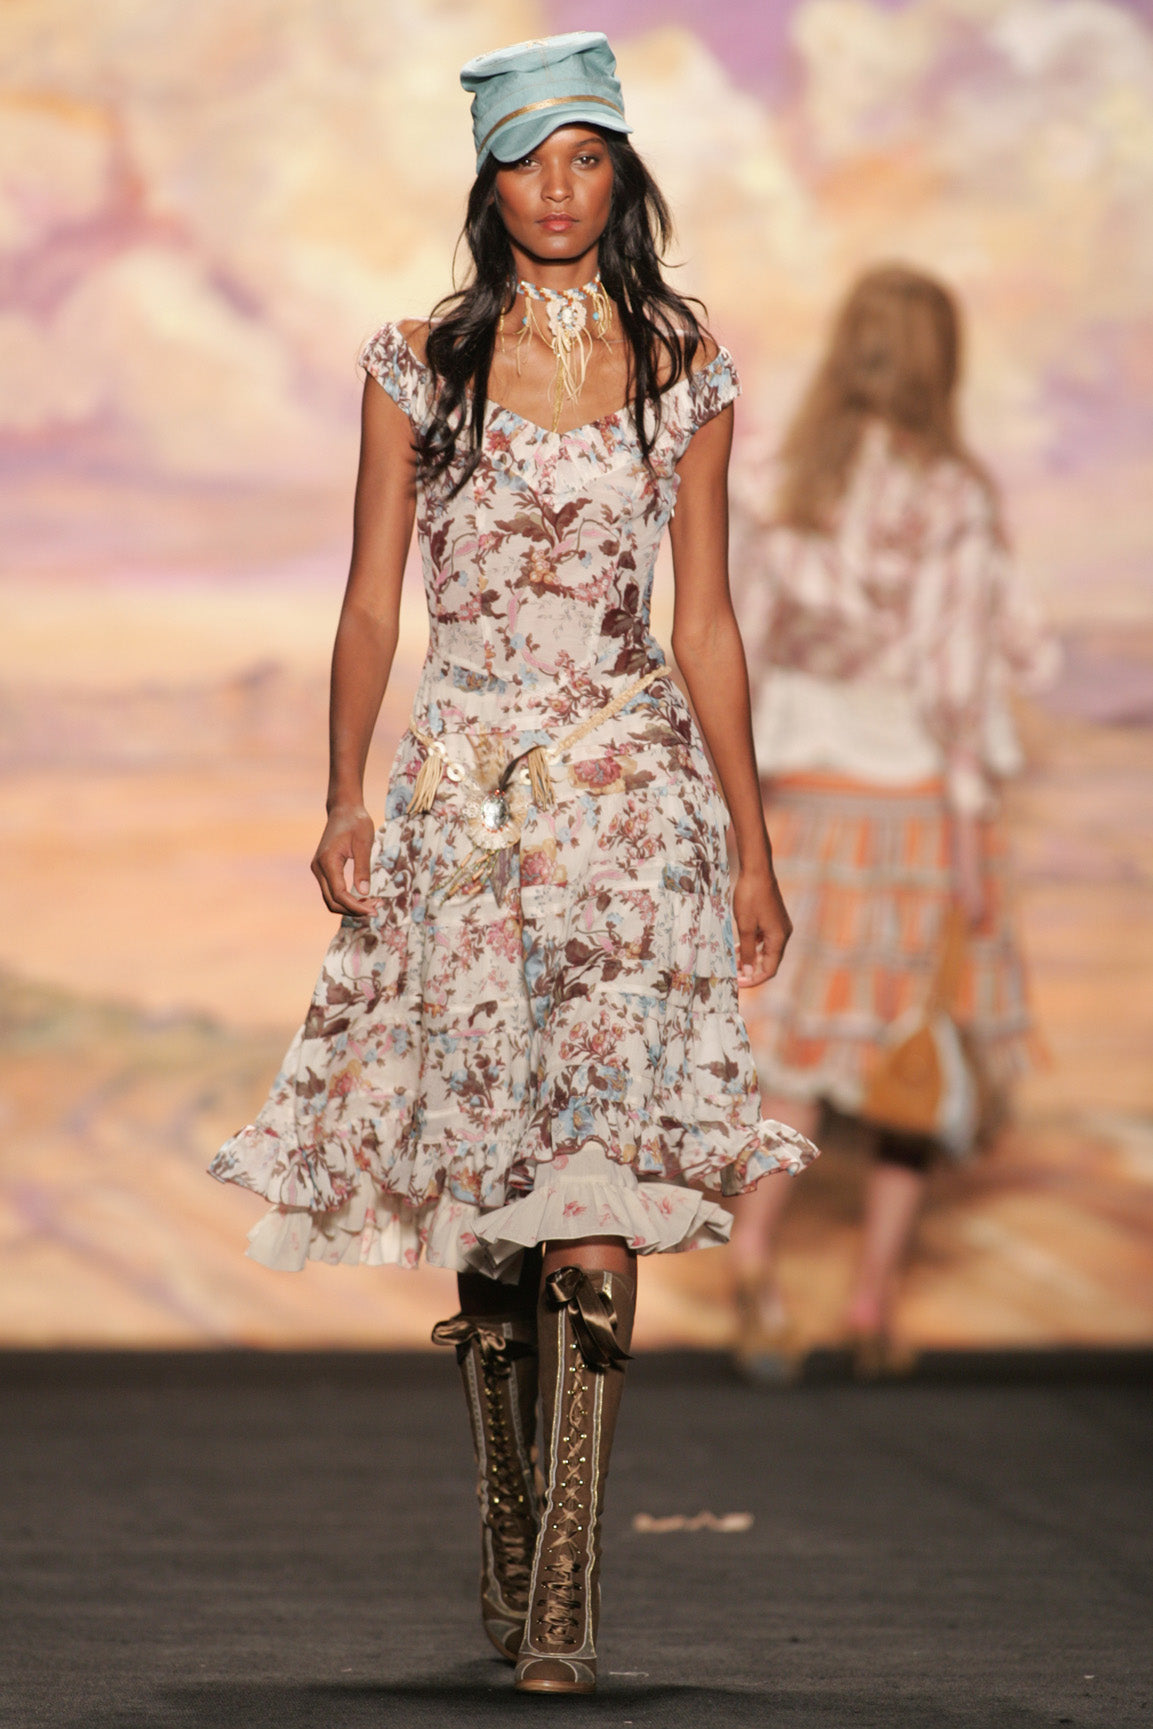 Another runway option flatters the waist & hips, white & brown floral design, large at bottom